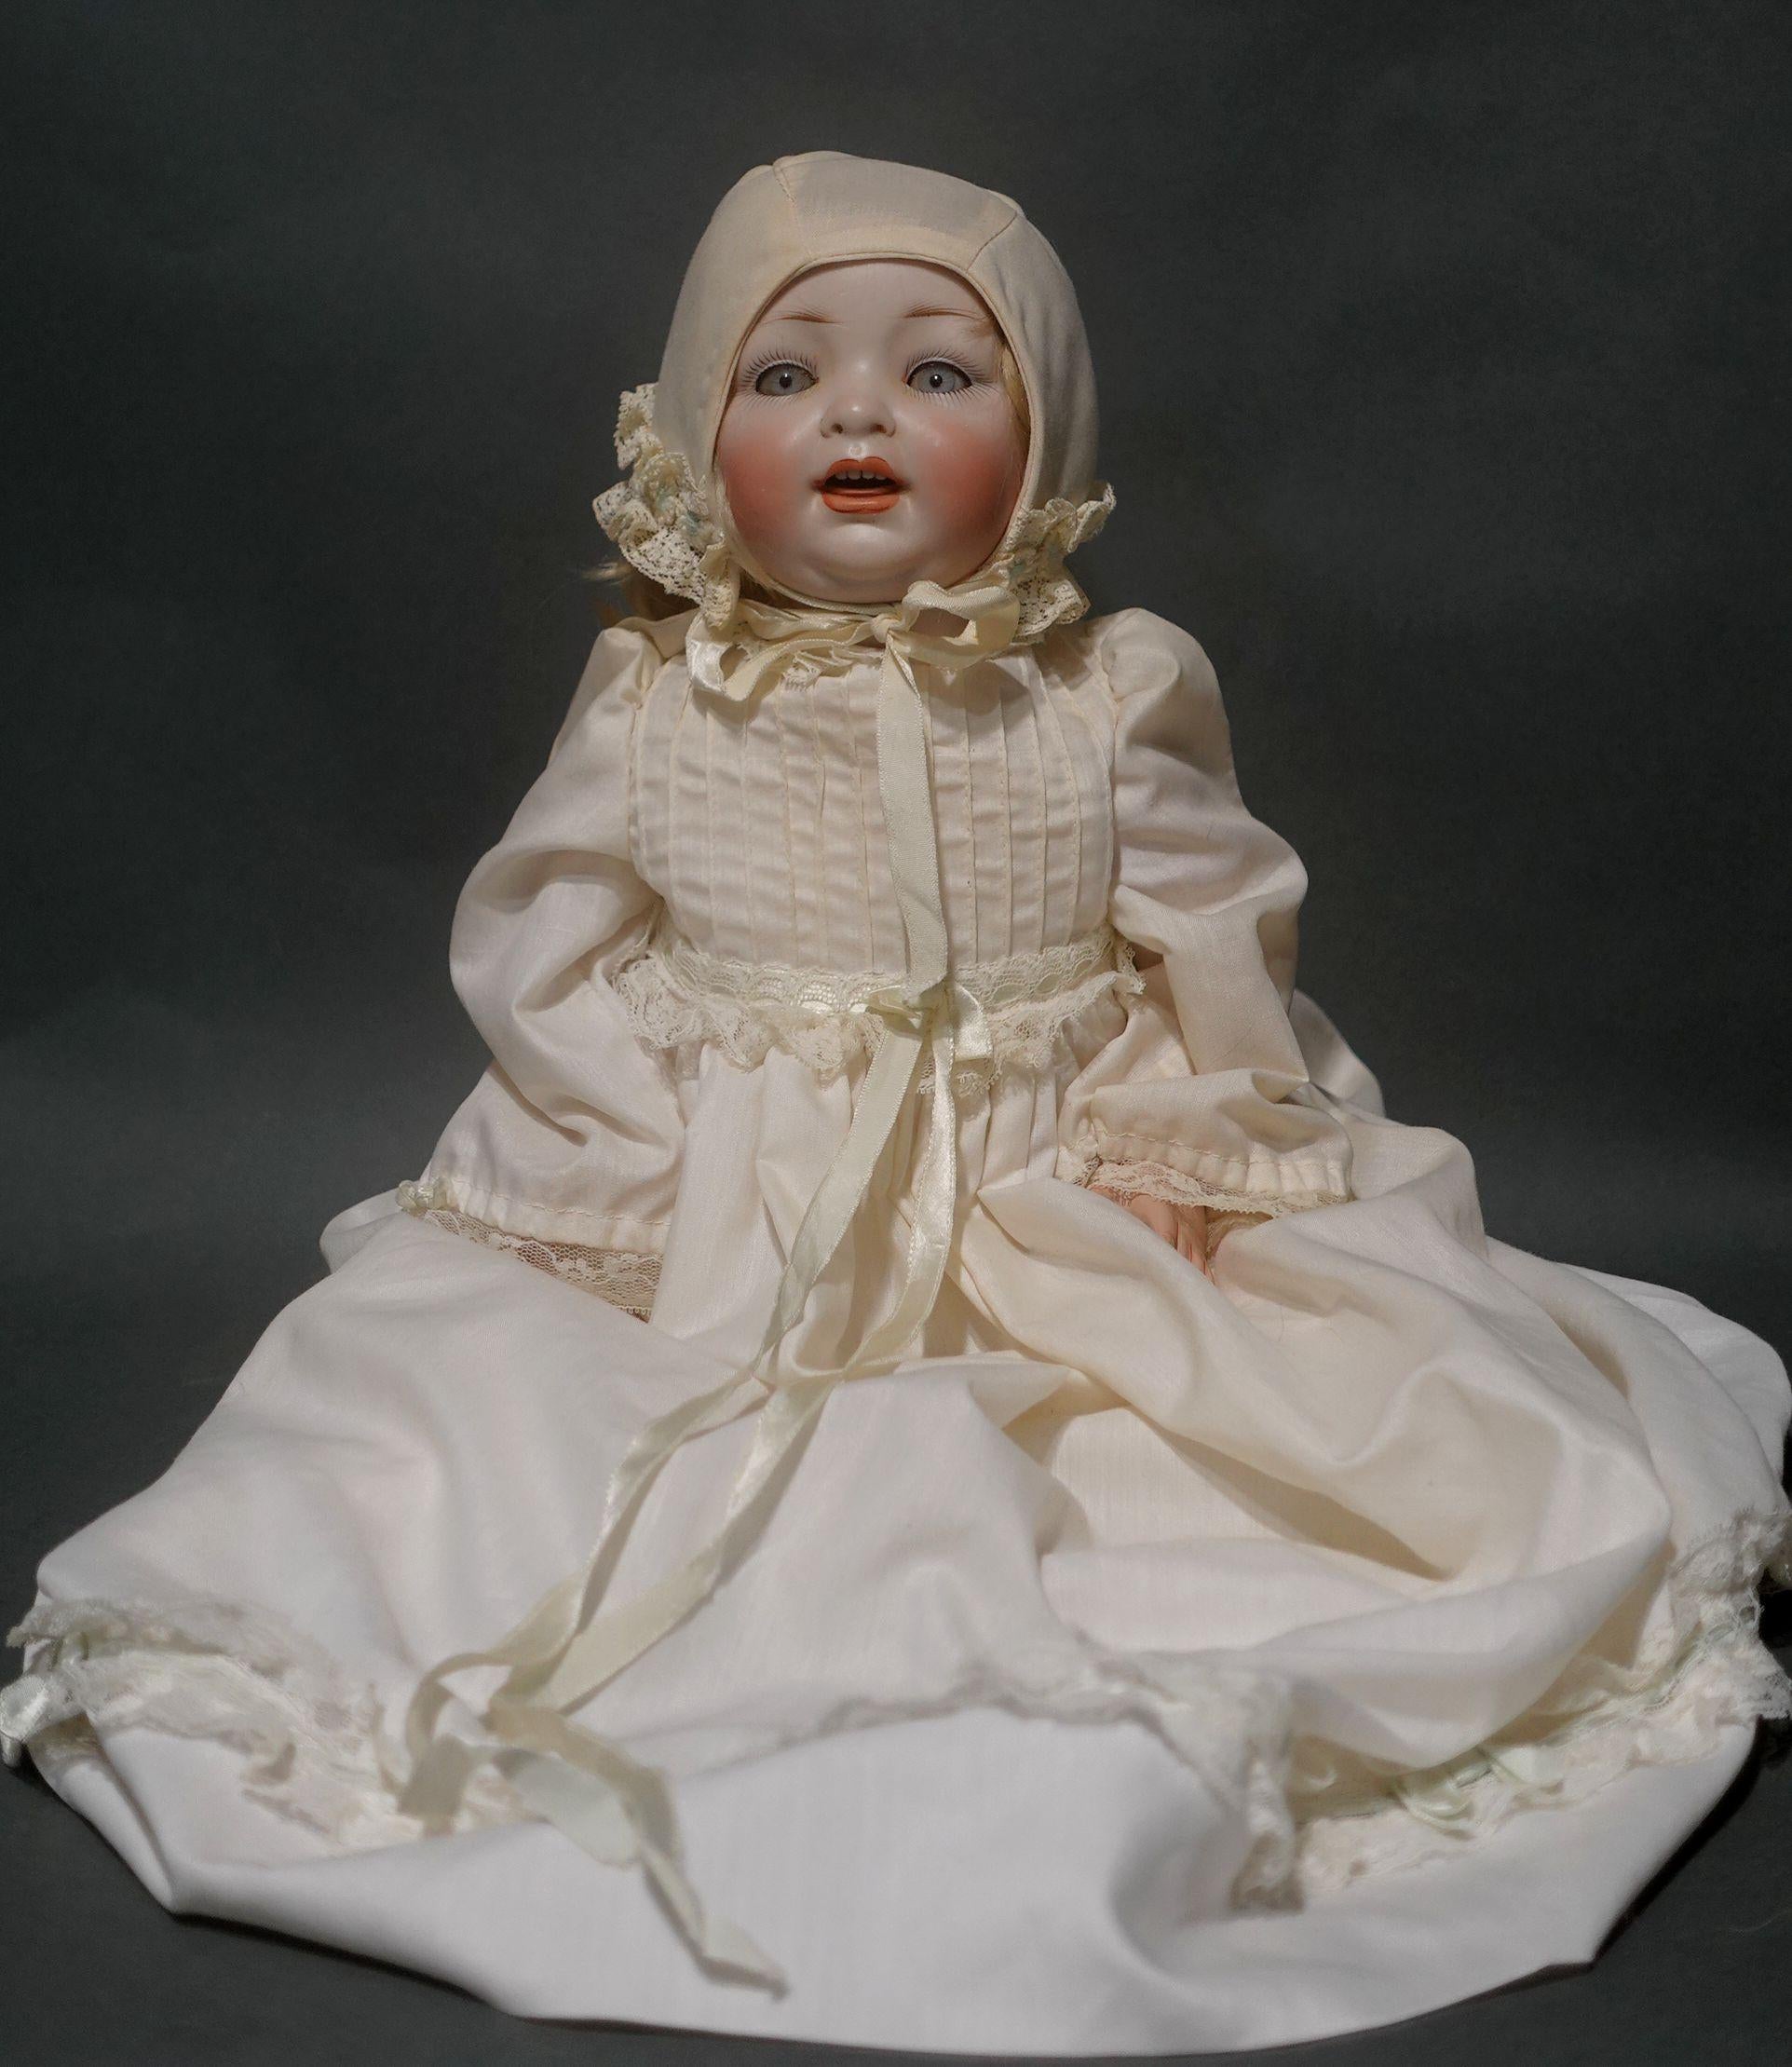 Antique Hertel Schwab baby doll 152/6 for Louis Wolf & Company. Measures approximately 15 inches in height. Beautiful blue glass sleep eyes with painted upper and lower lashes. Painted eyebrows. Open mouth with four insert upper teeth and a bisque